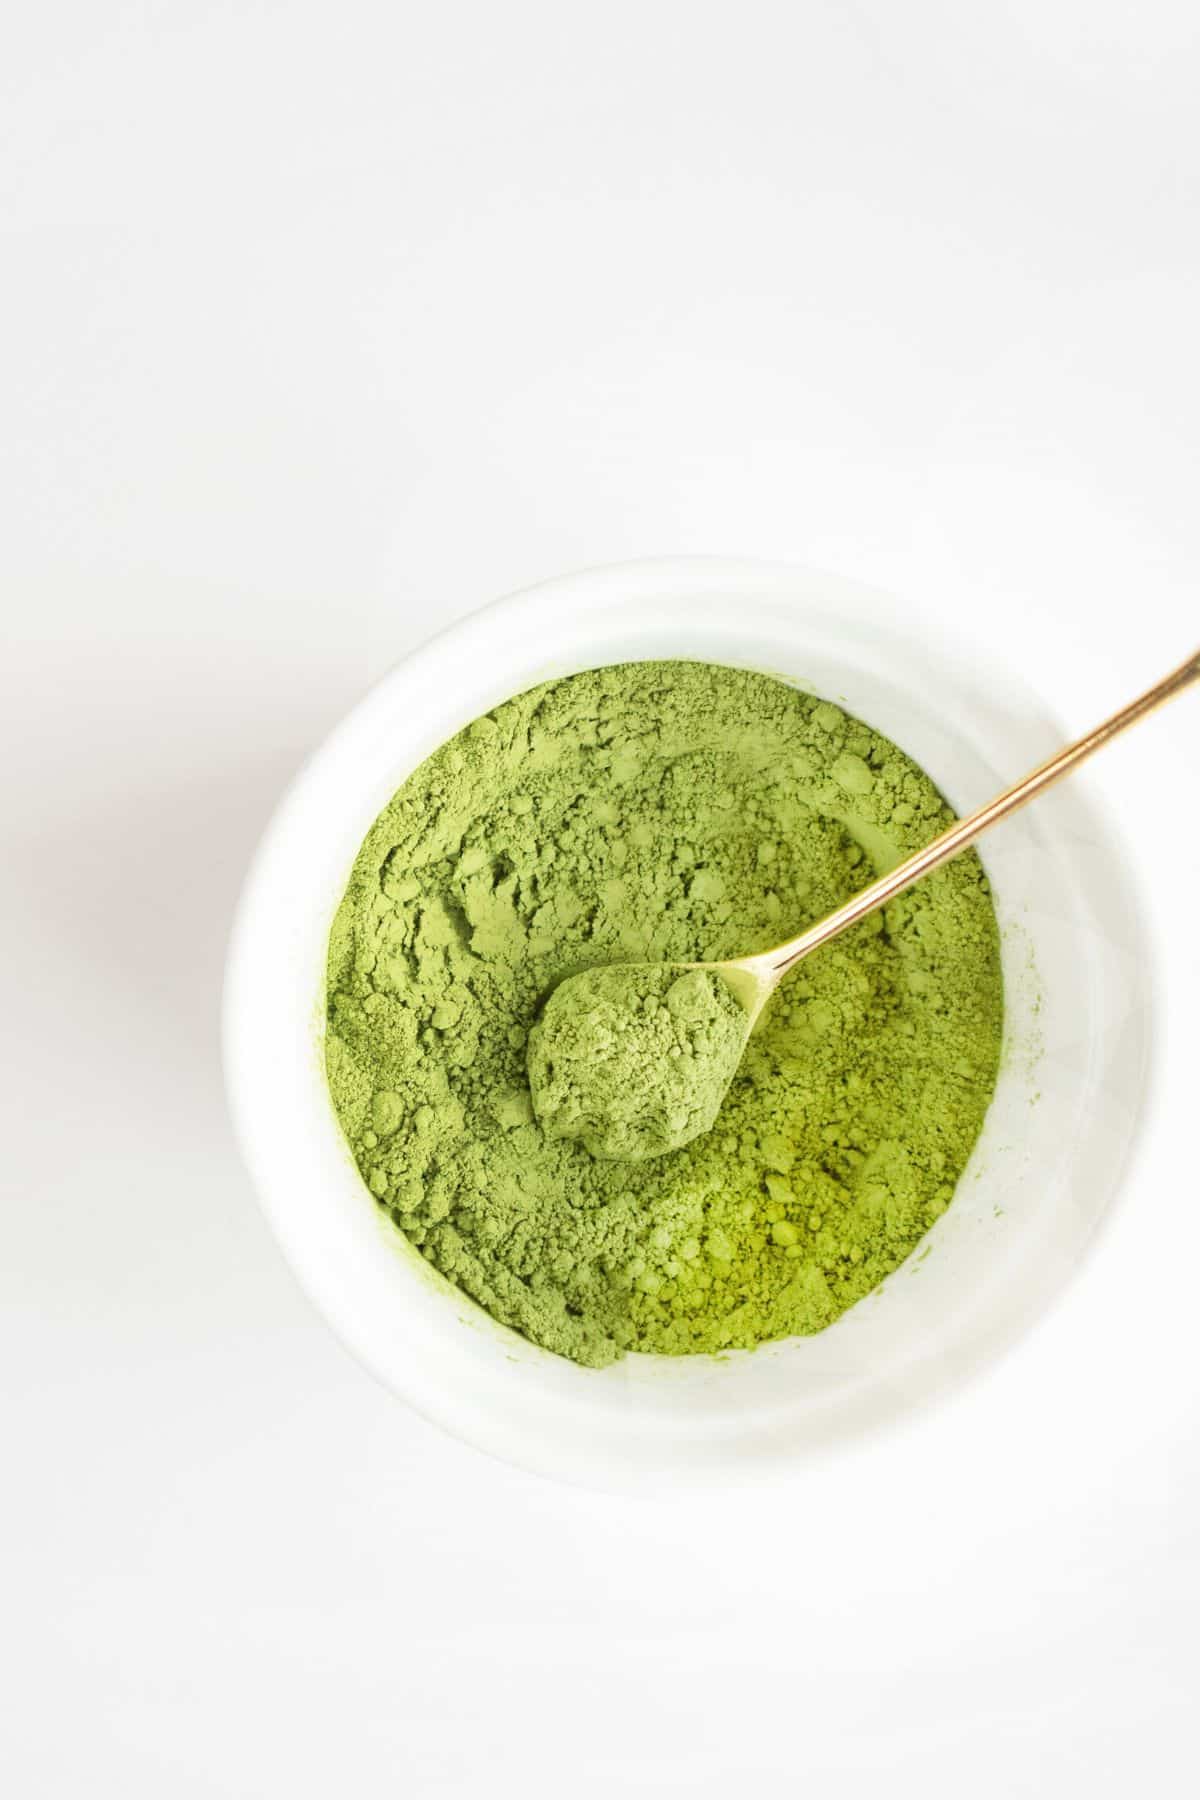 A small white bowl of green matcha powder with a gold spoon.